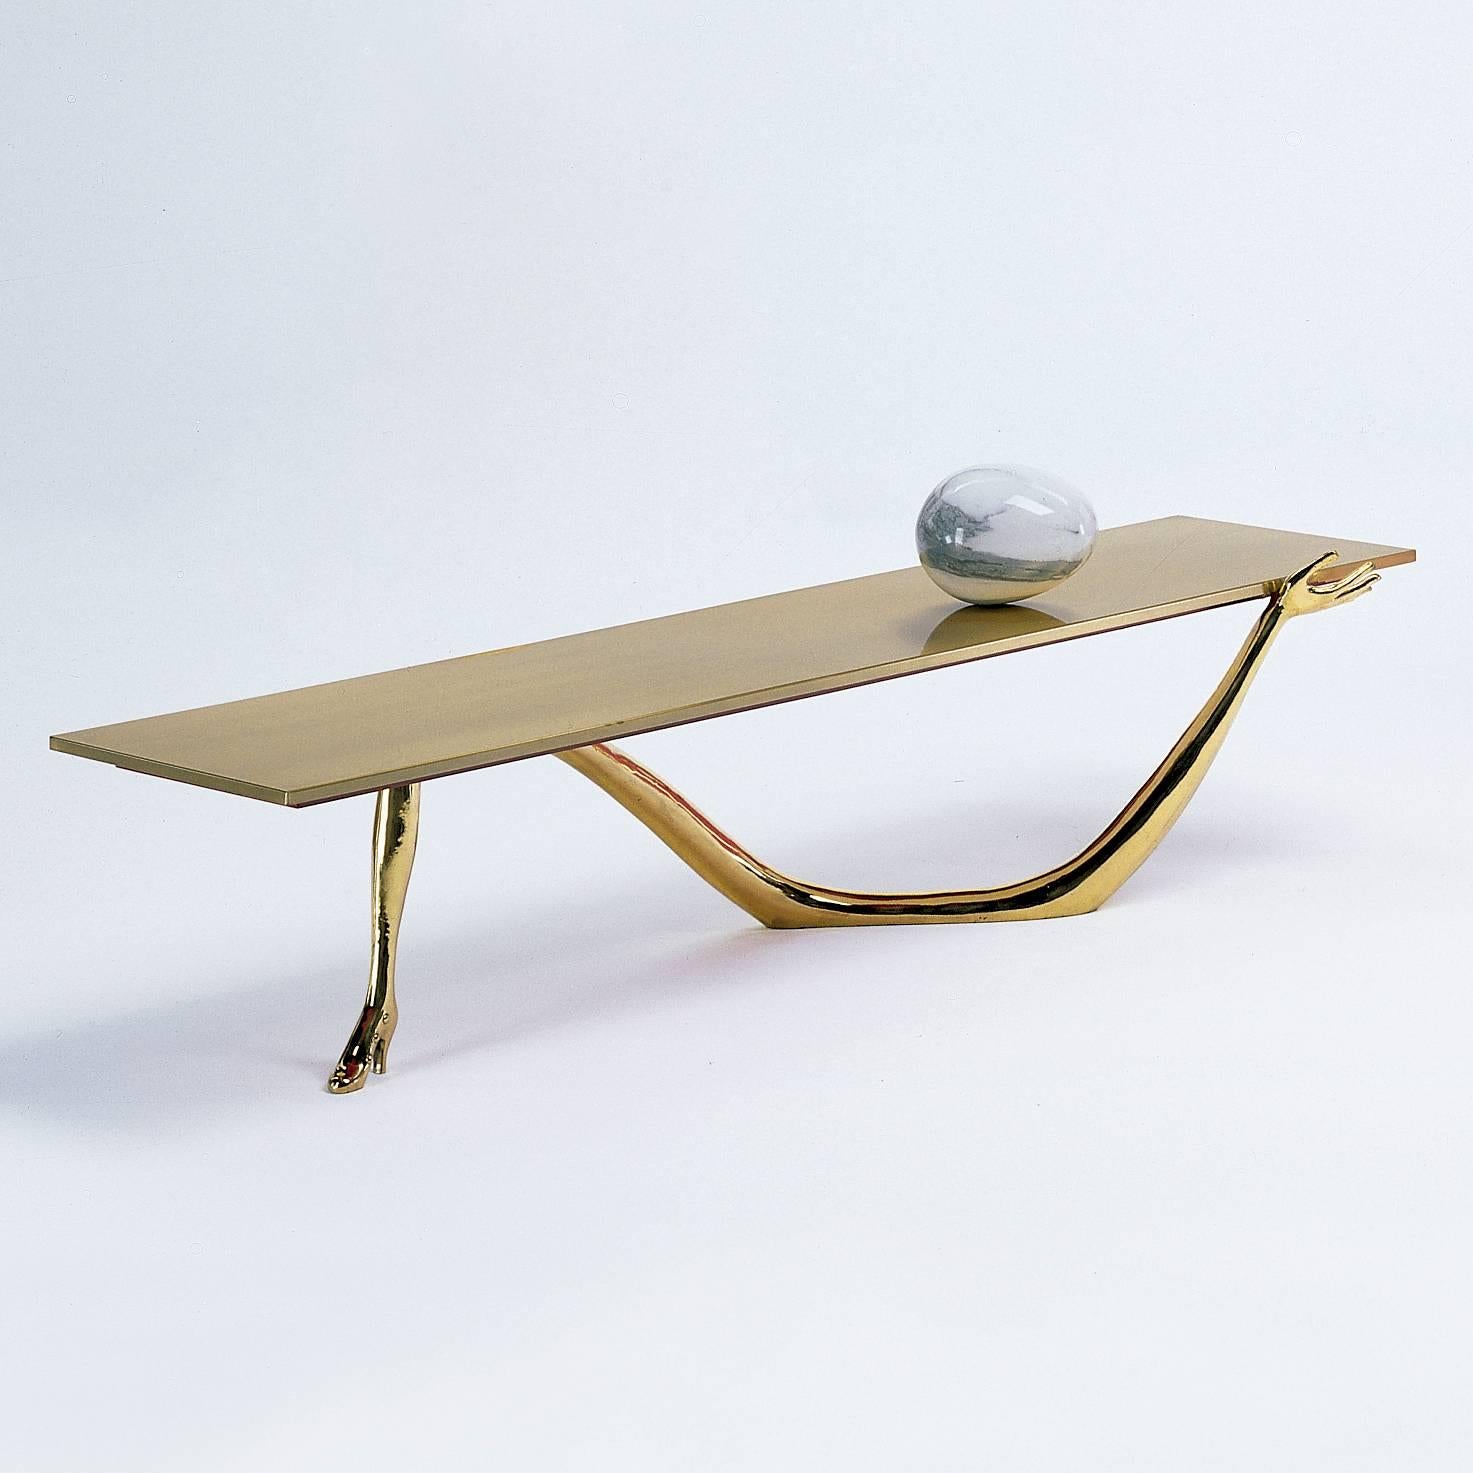 Leda low table designed by Dali manufactured by BD.

Legs are in a cast varnish brass.
Tabletop in brushed and varnished brass.
Carrara marble egg on top.

Measures: 51 x 190 x 61 H.cm

During the ‘thirties in Paris, Salvador Dalí surrounded